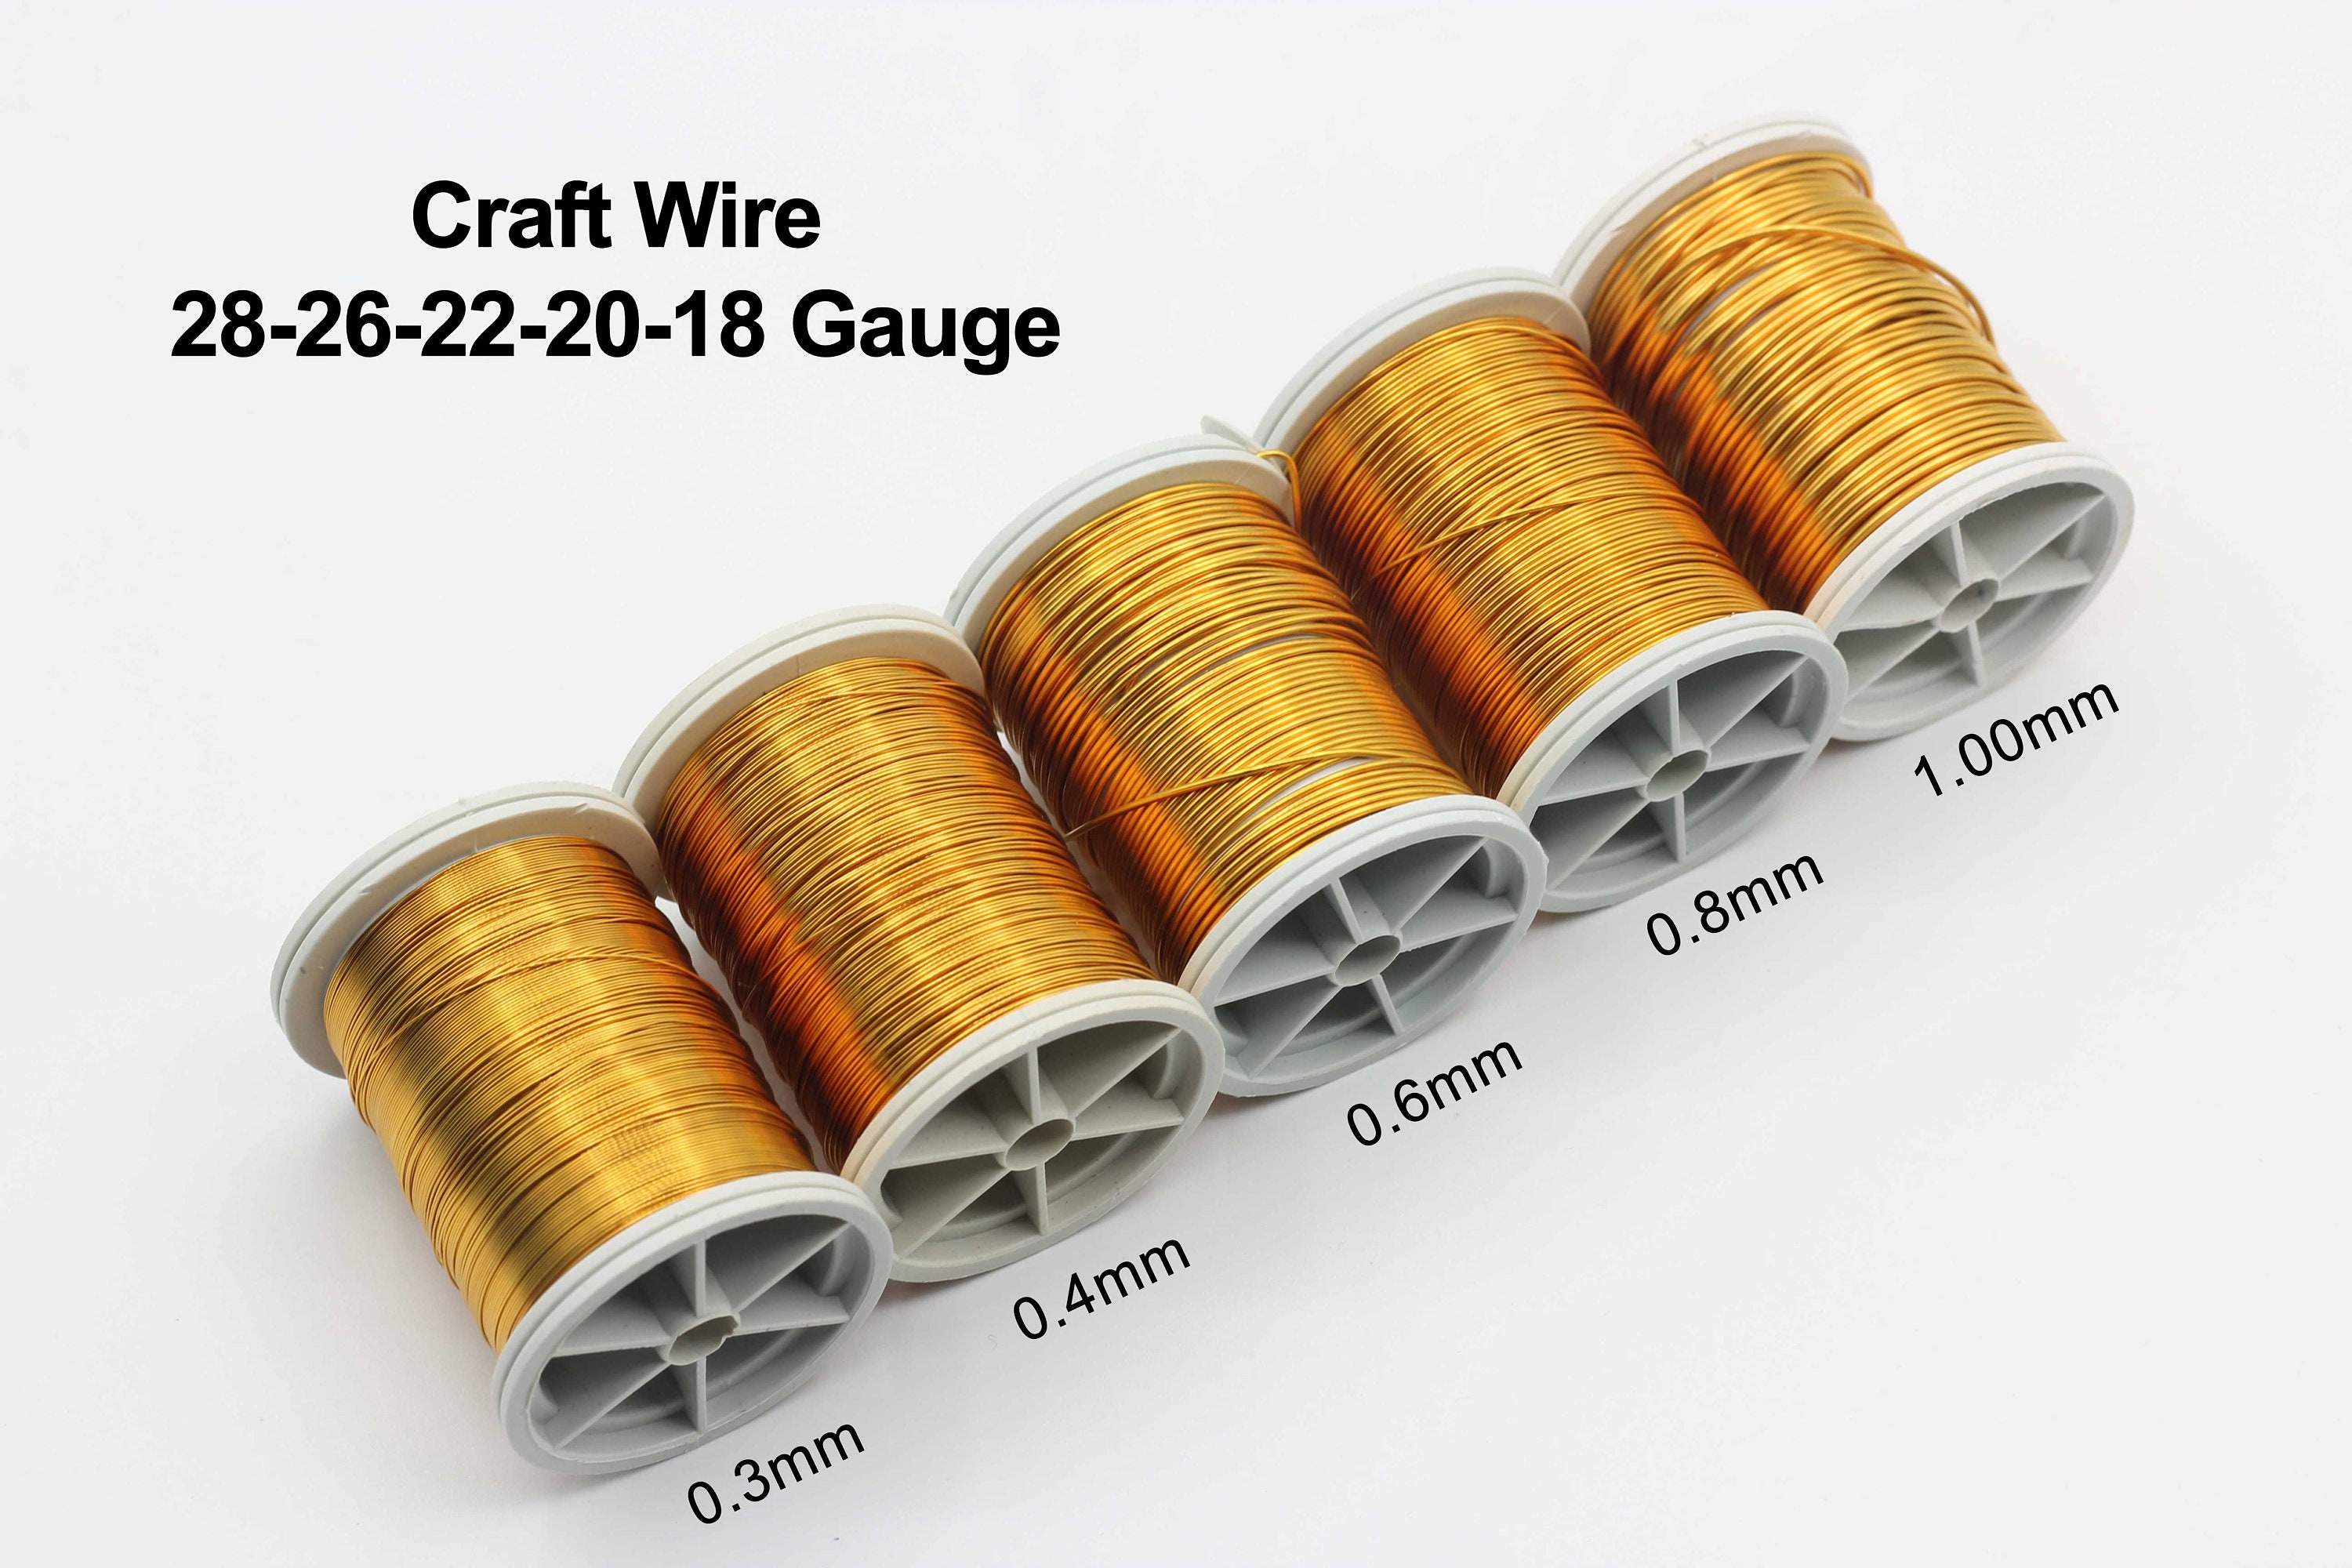 Parawire Vintage Bronze-finished Copper Craft Wire 18-Gauge 7-Yards with Clear Protective Coating